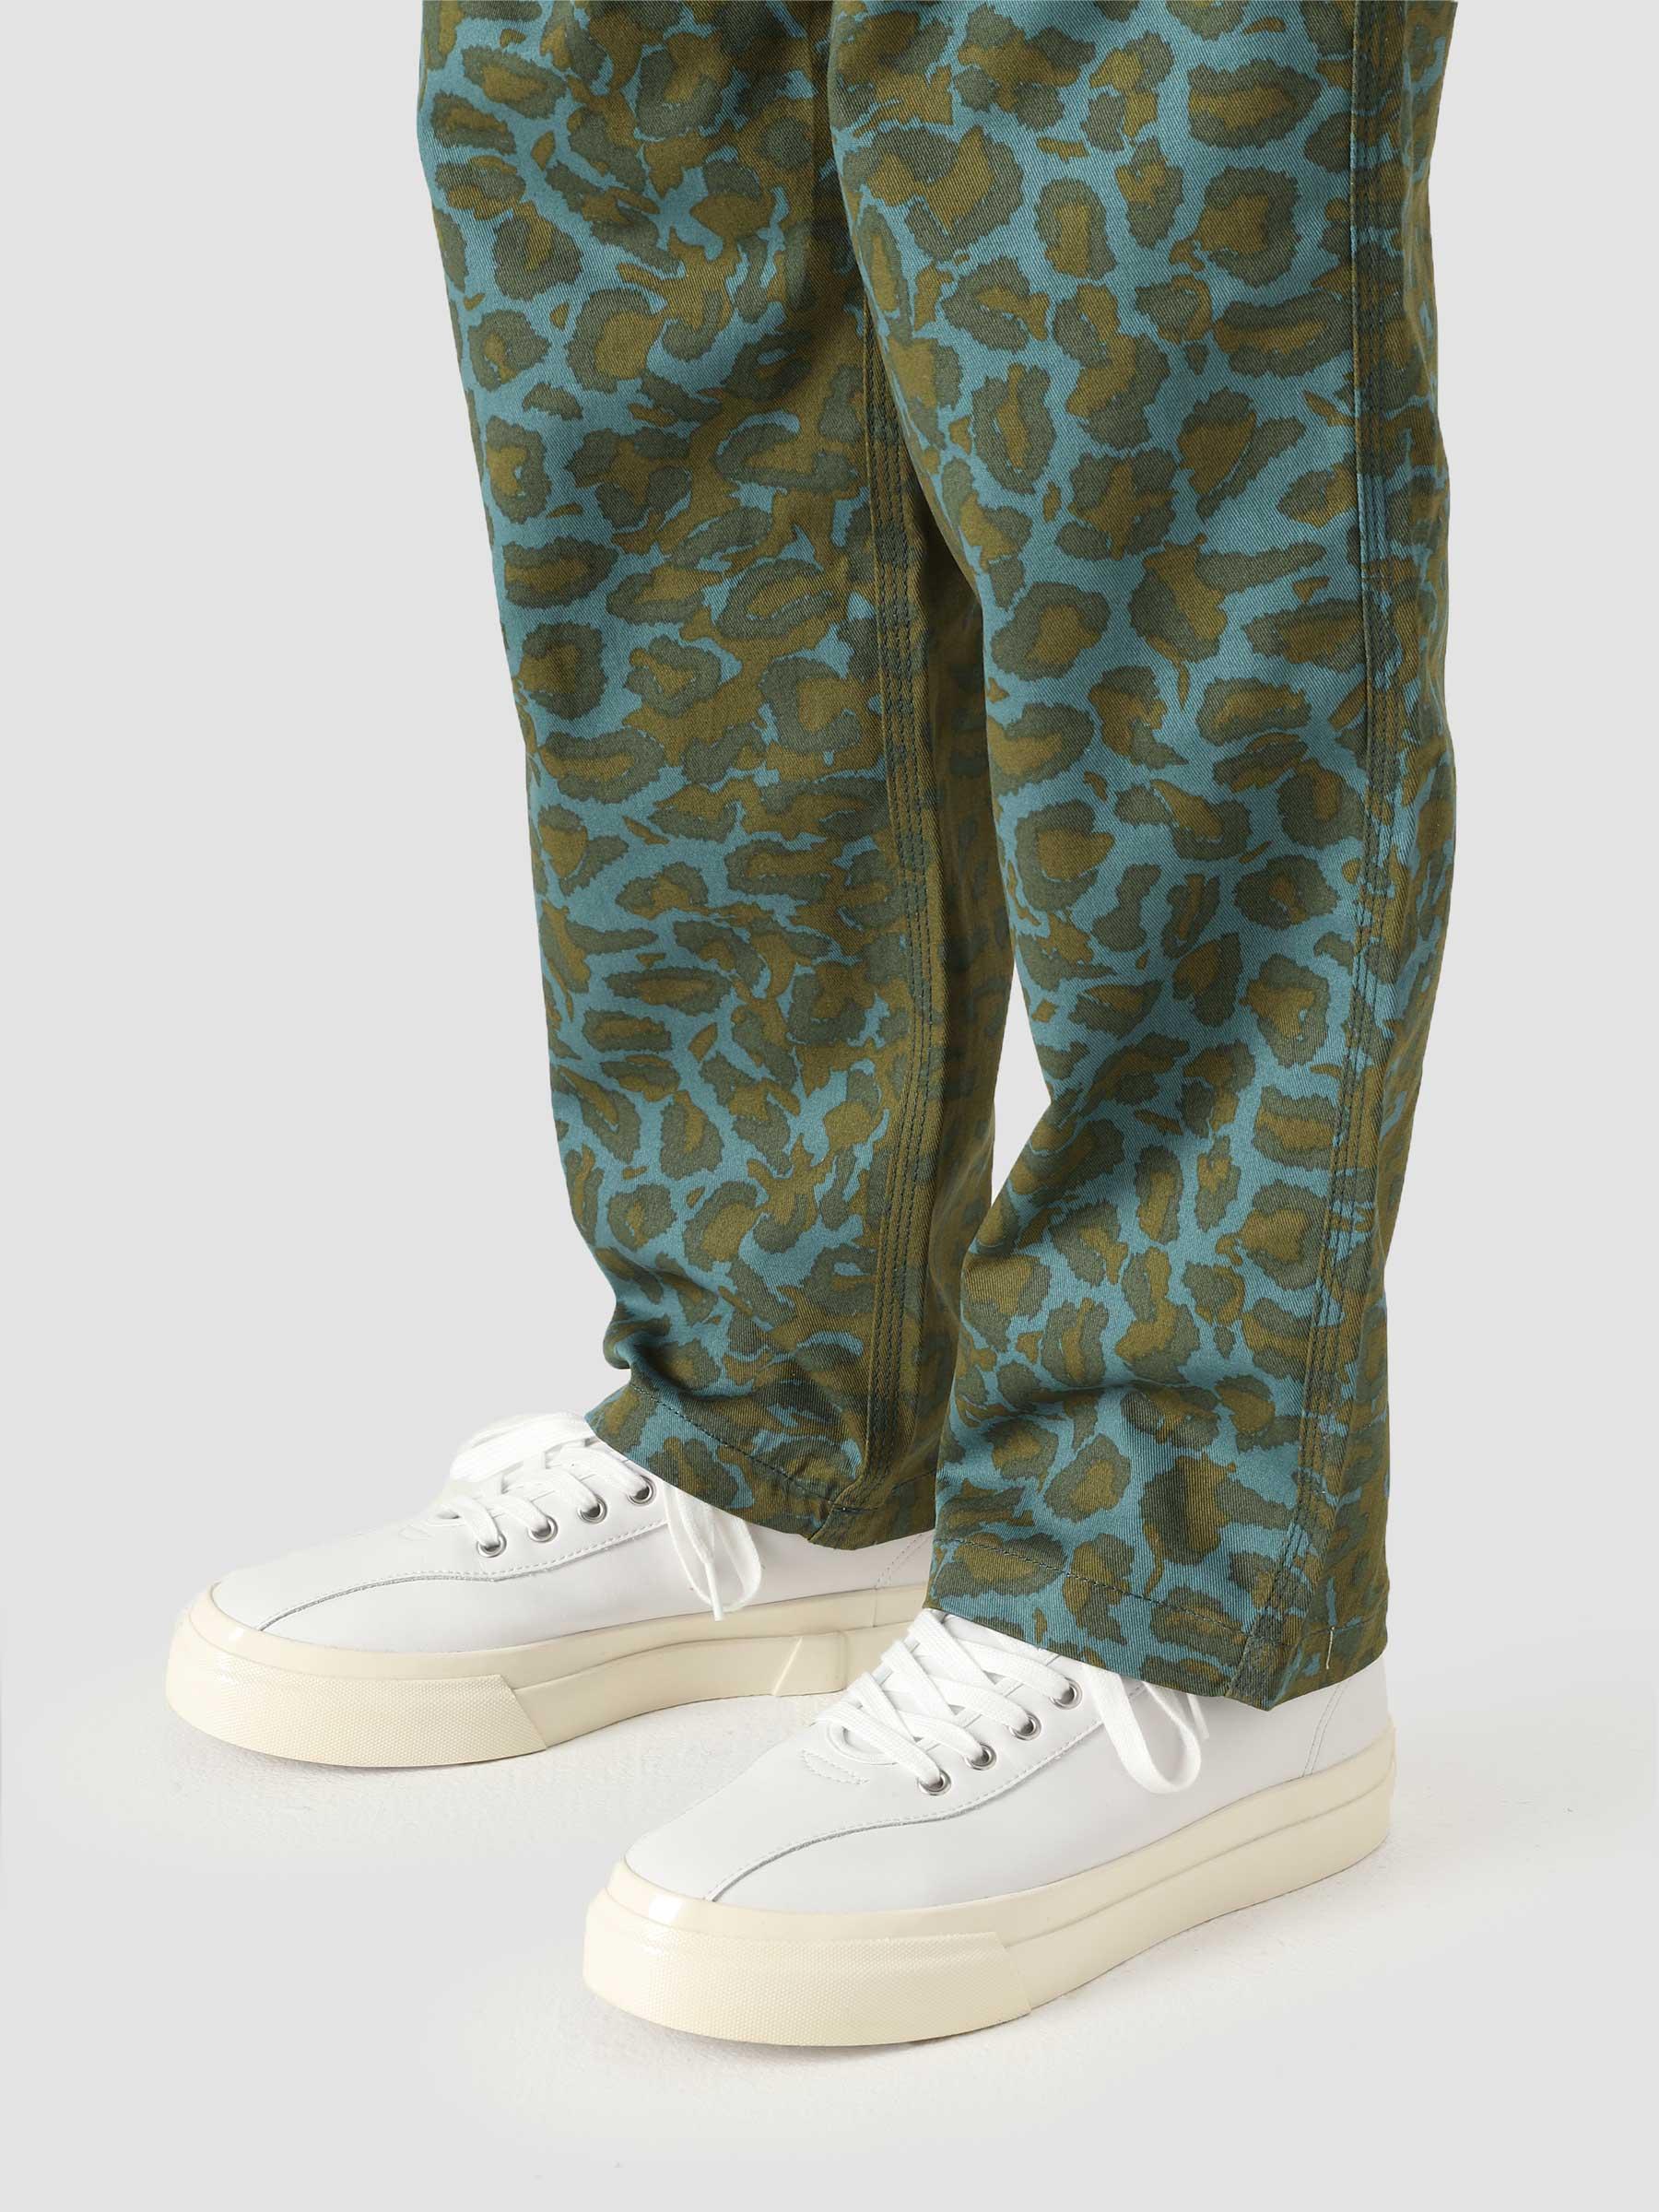 Printed Runyon Easy Pant Leopard Camo PT00186-LEPCM